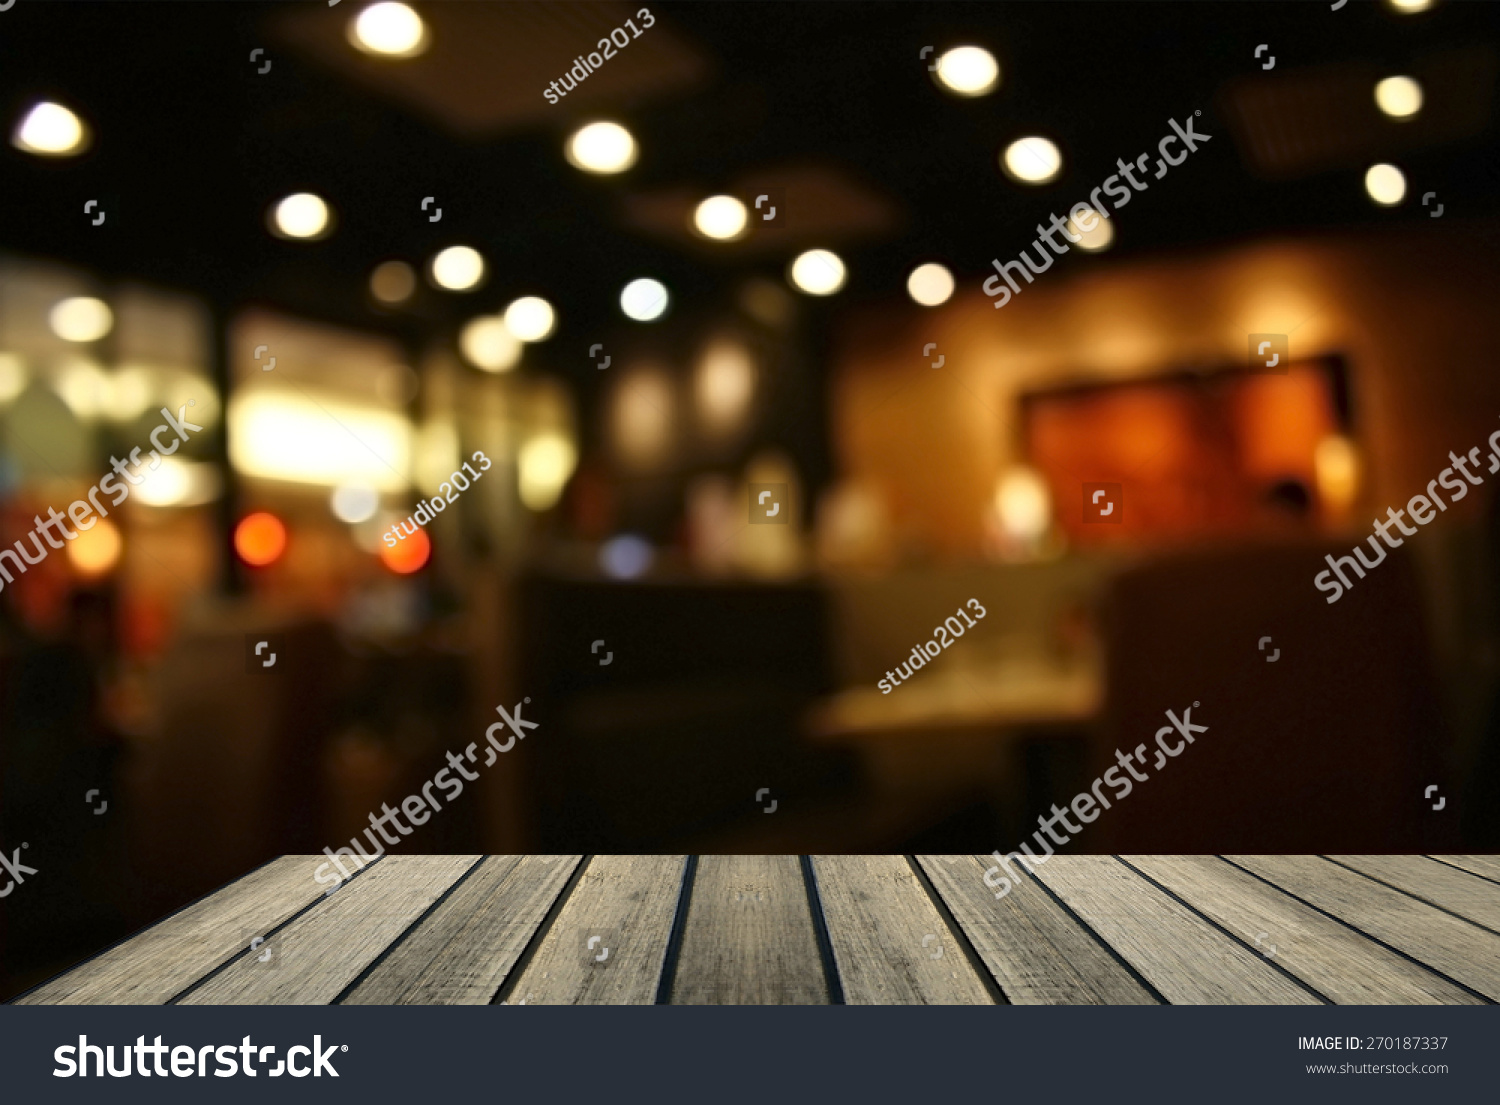 Blurred background : Customer at restaurant blur background with copy space for text #270187337